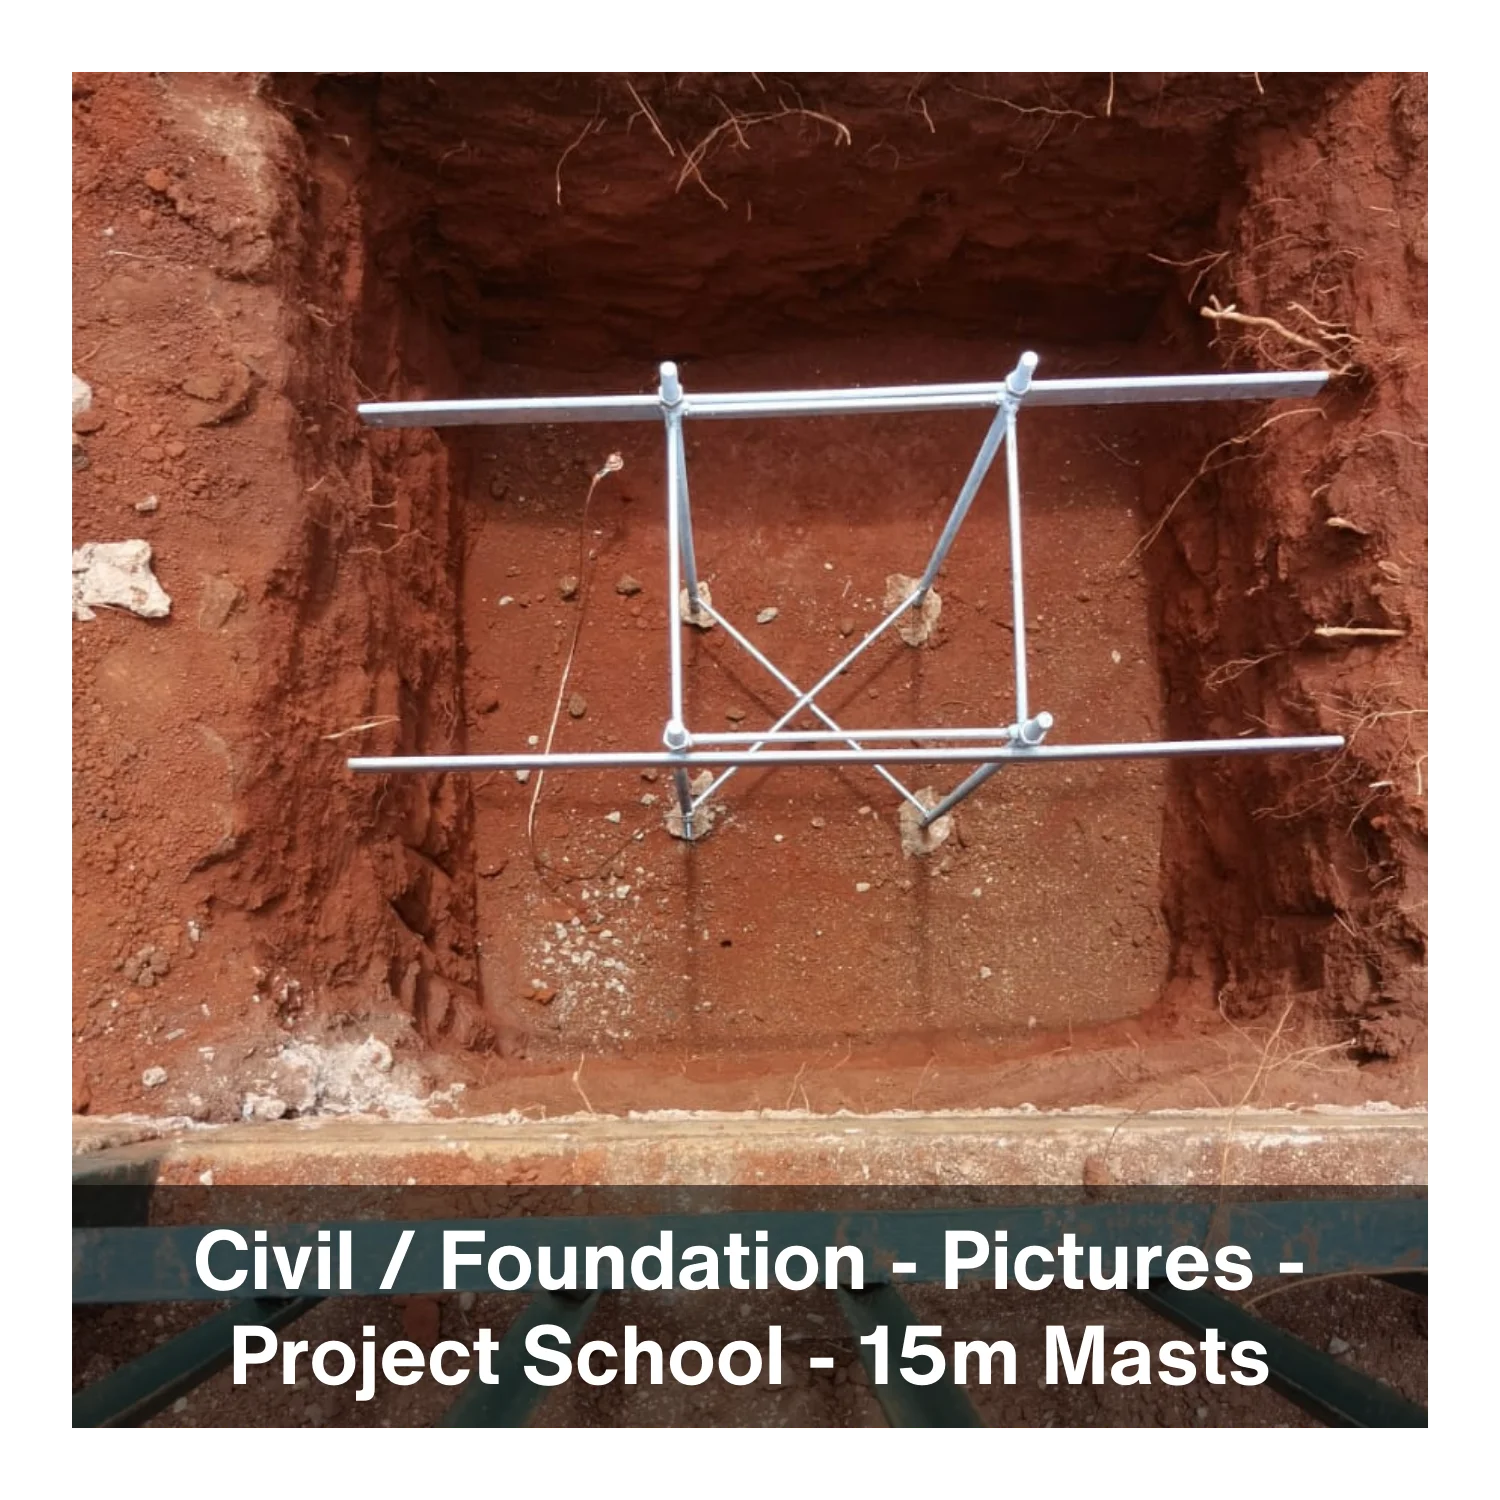 Civil / Foundation pictures example